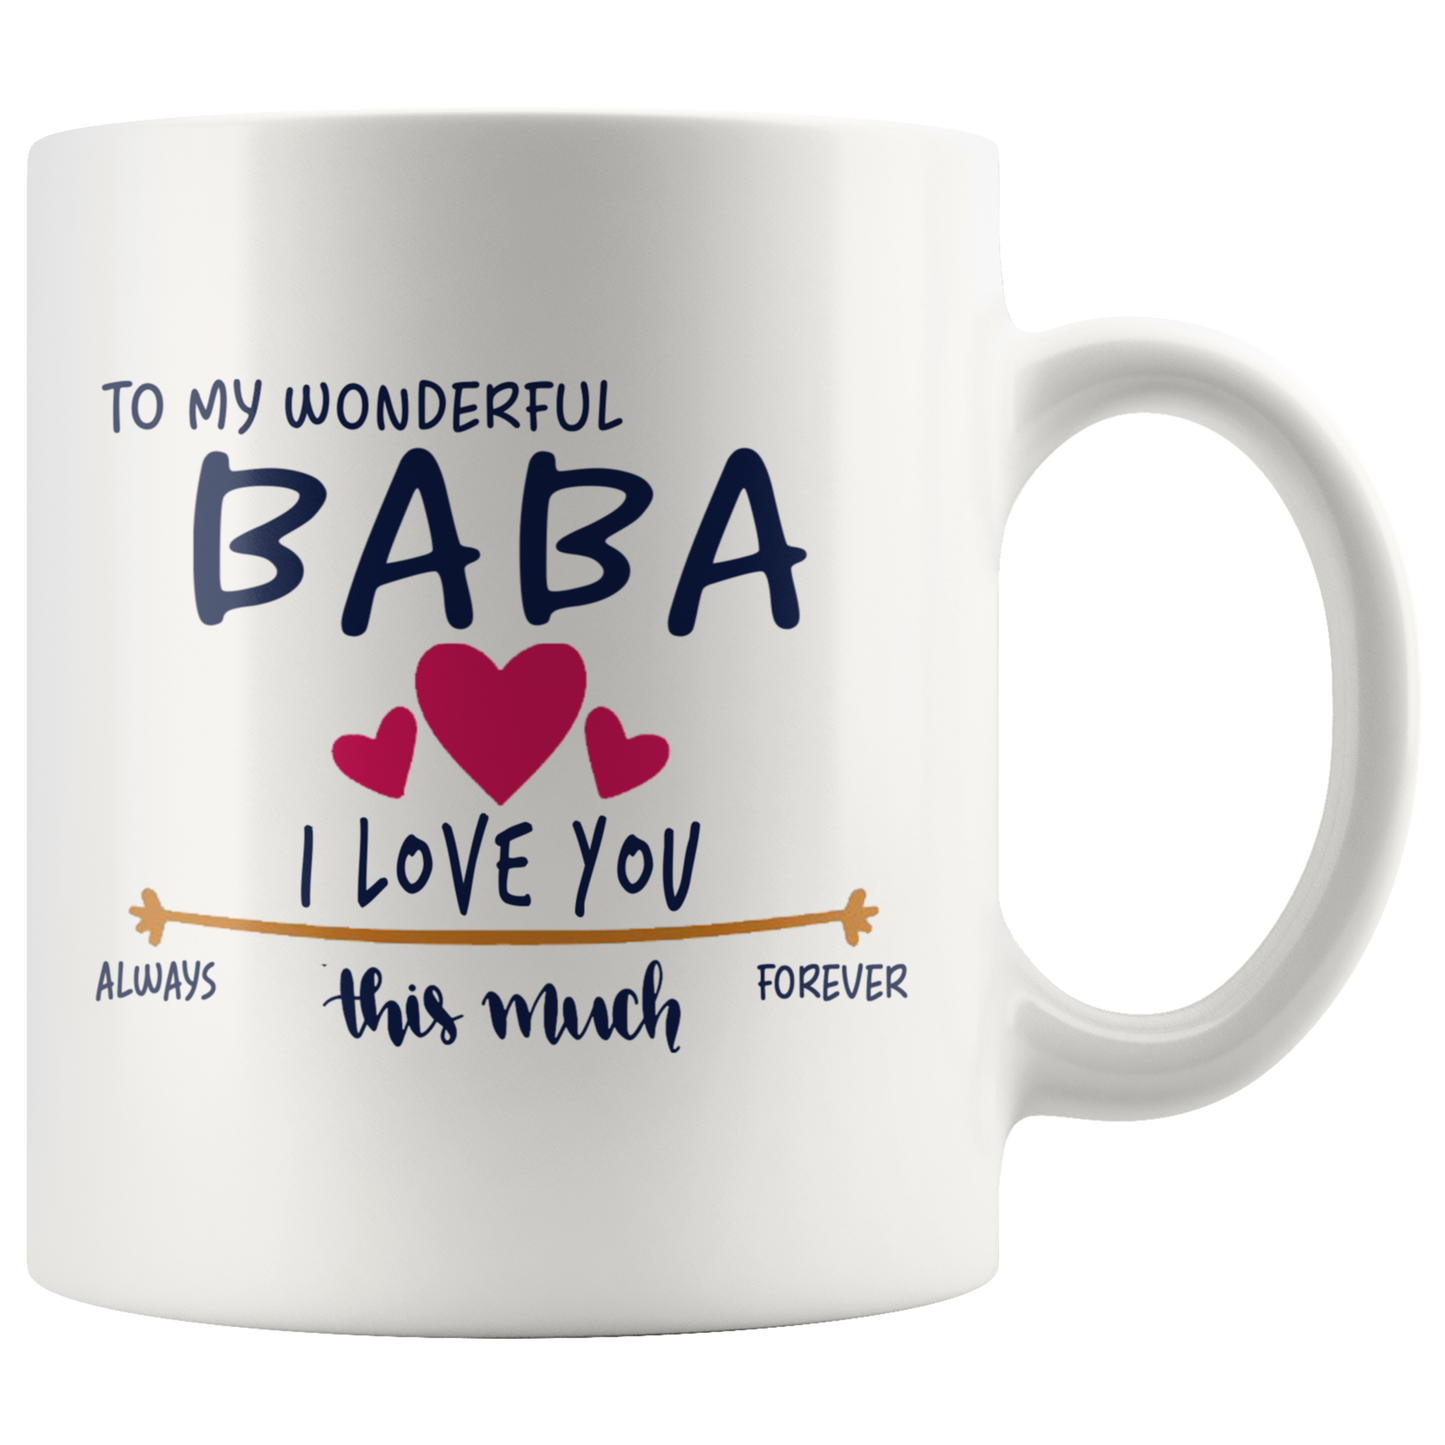 M-20470284-sp-22945 - Valentines Day Mug Gifts For Dad, Mom, Granddad, Granny - To